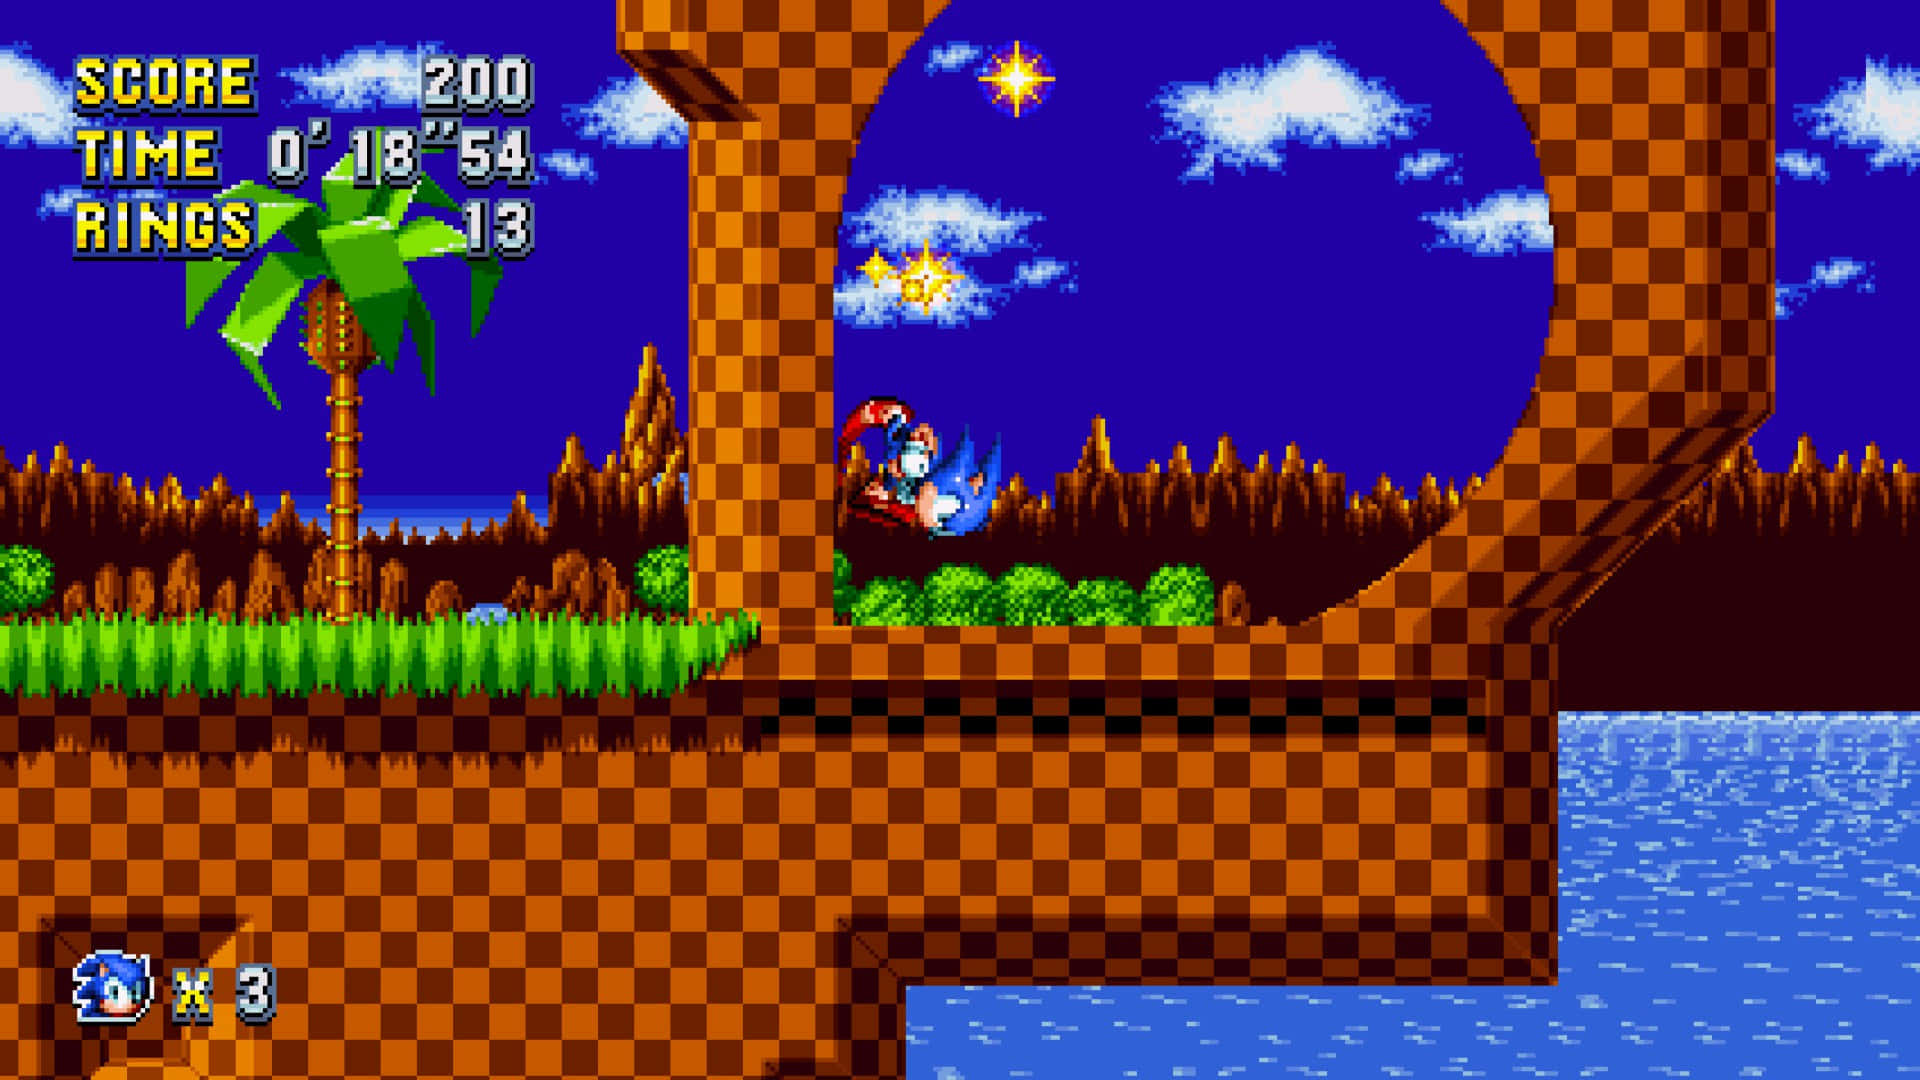 Download Green Hill Zone With A Loop Obstacle Wallpaper